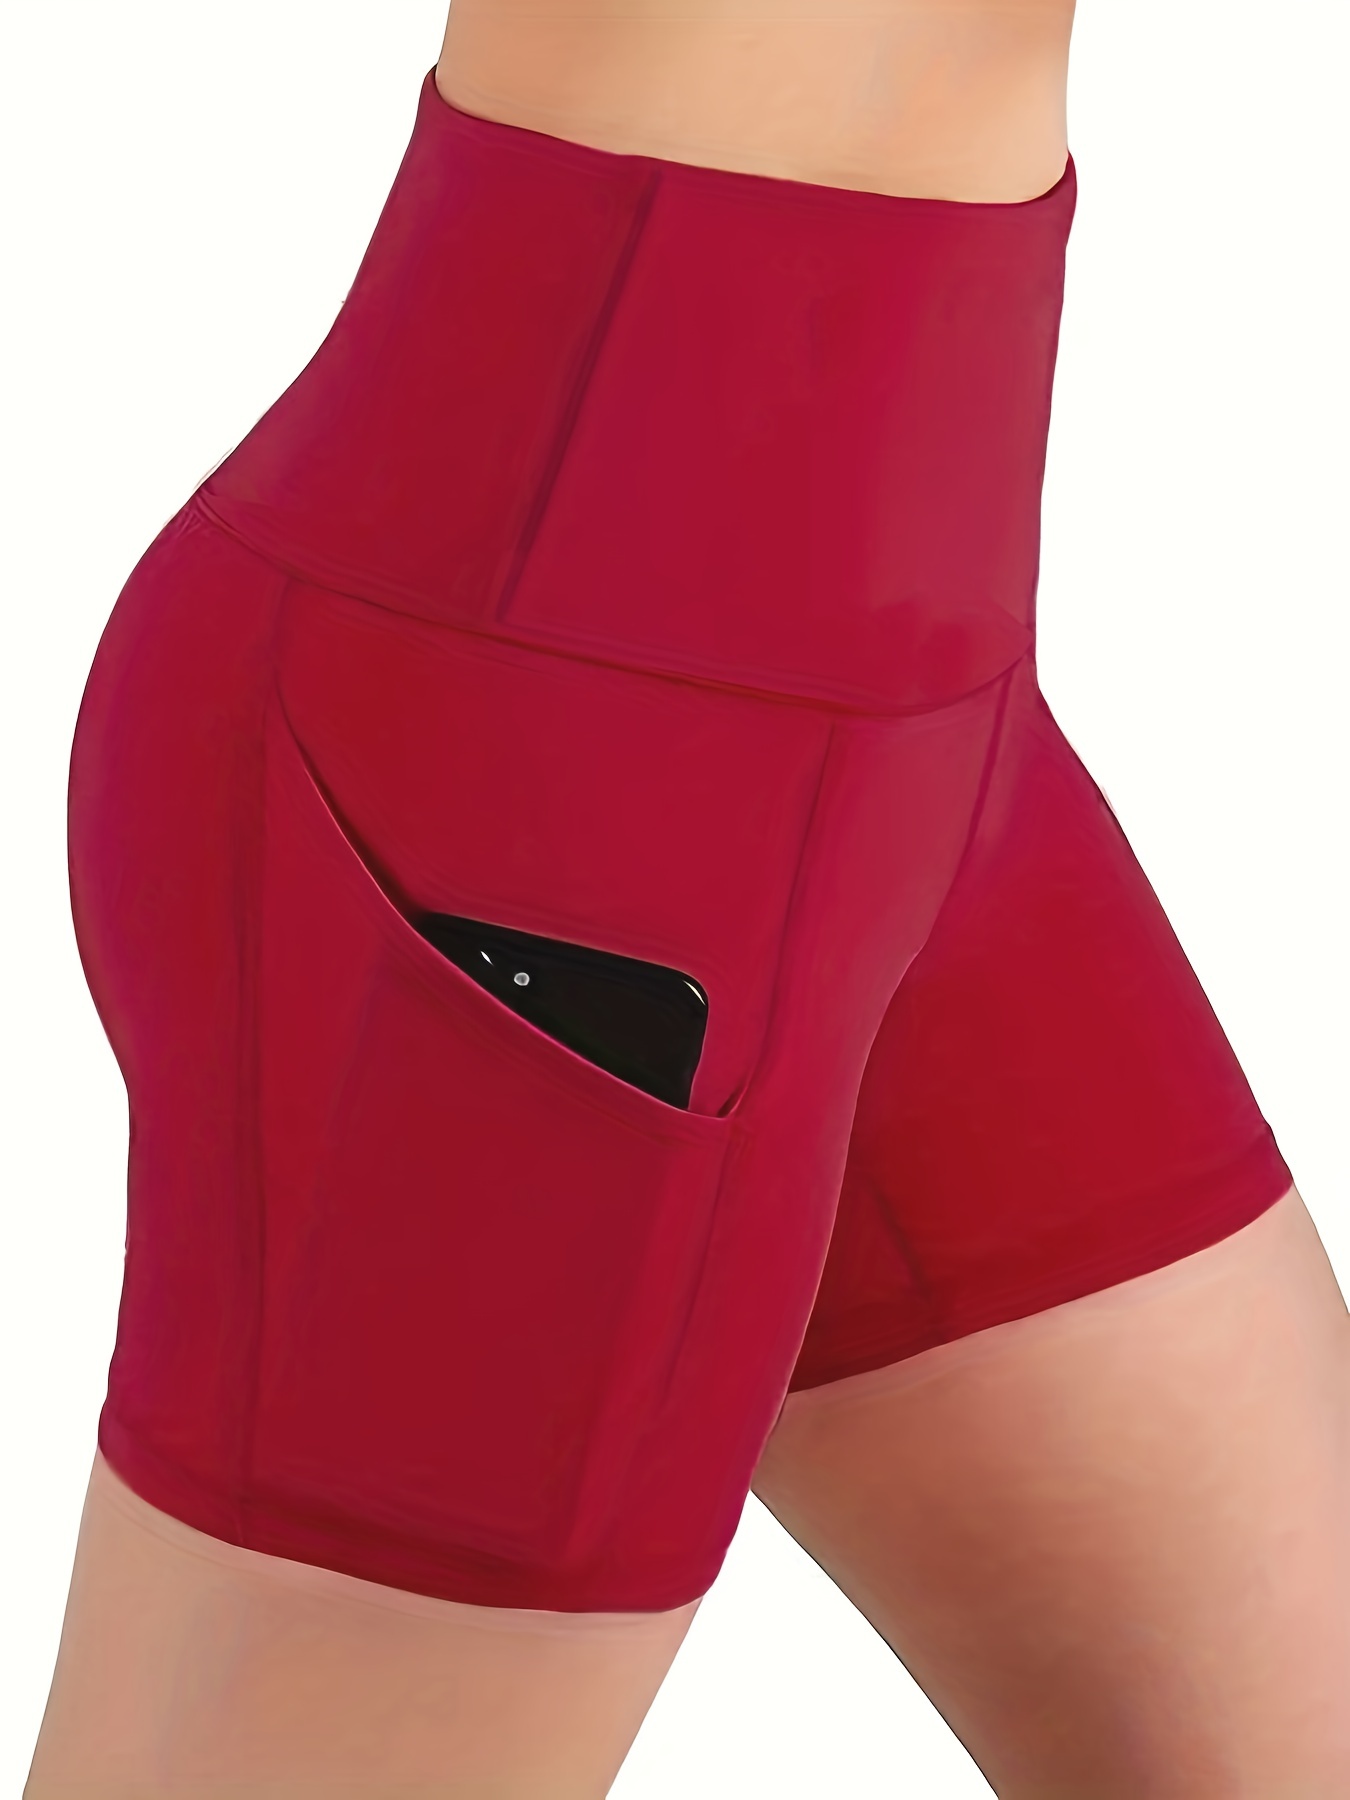 High Waist Stretch Pocket Side Running Athletic Workout Sports